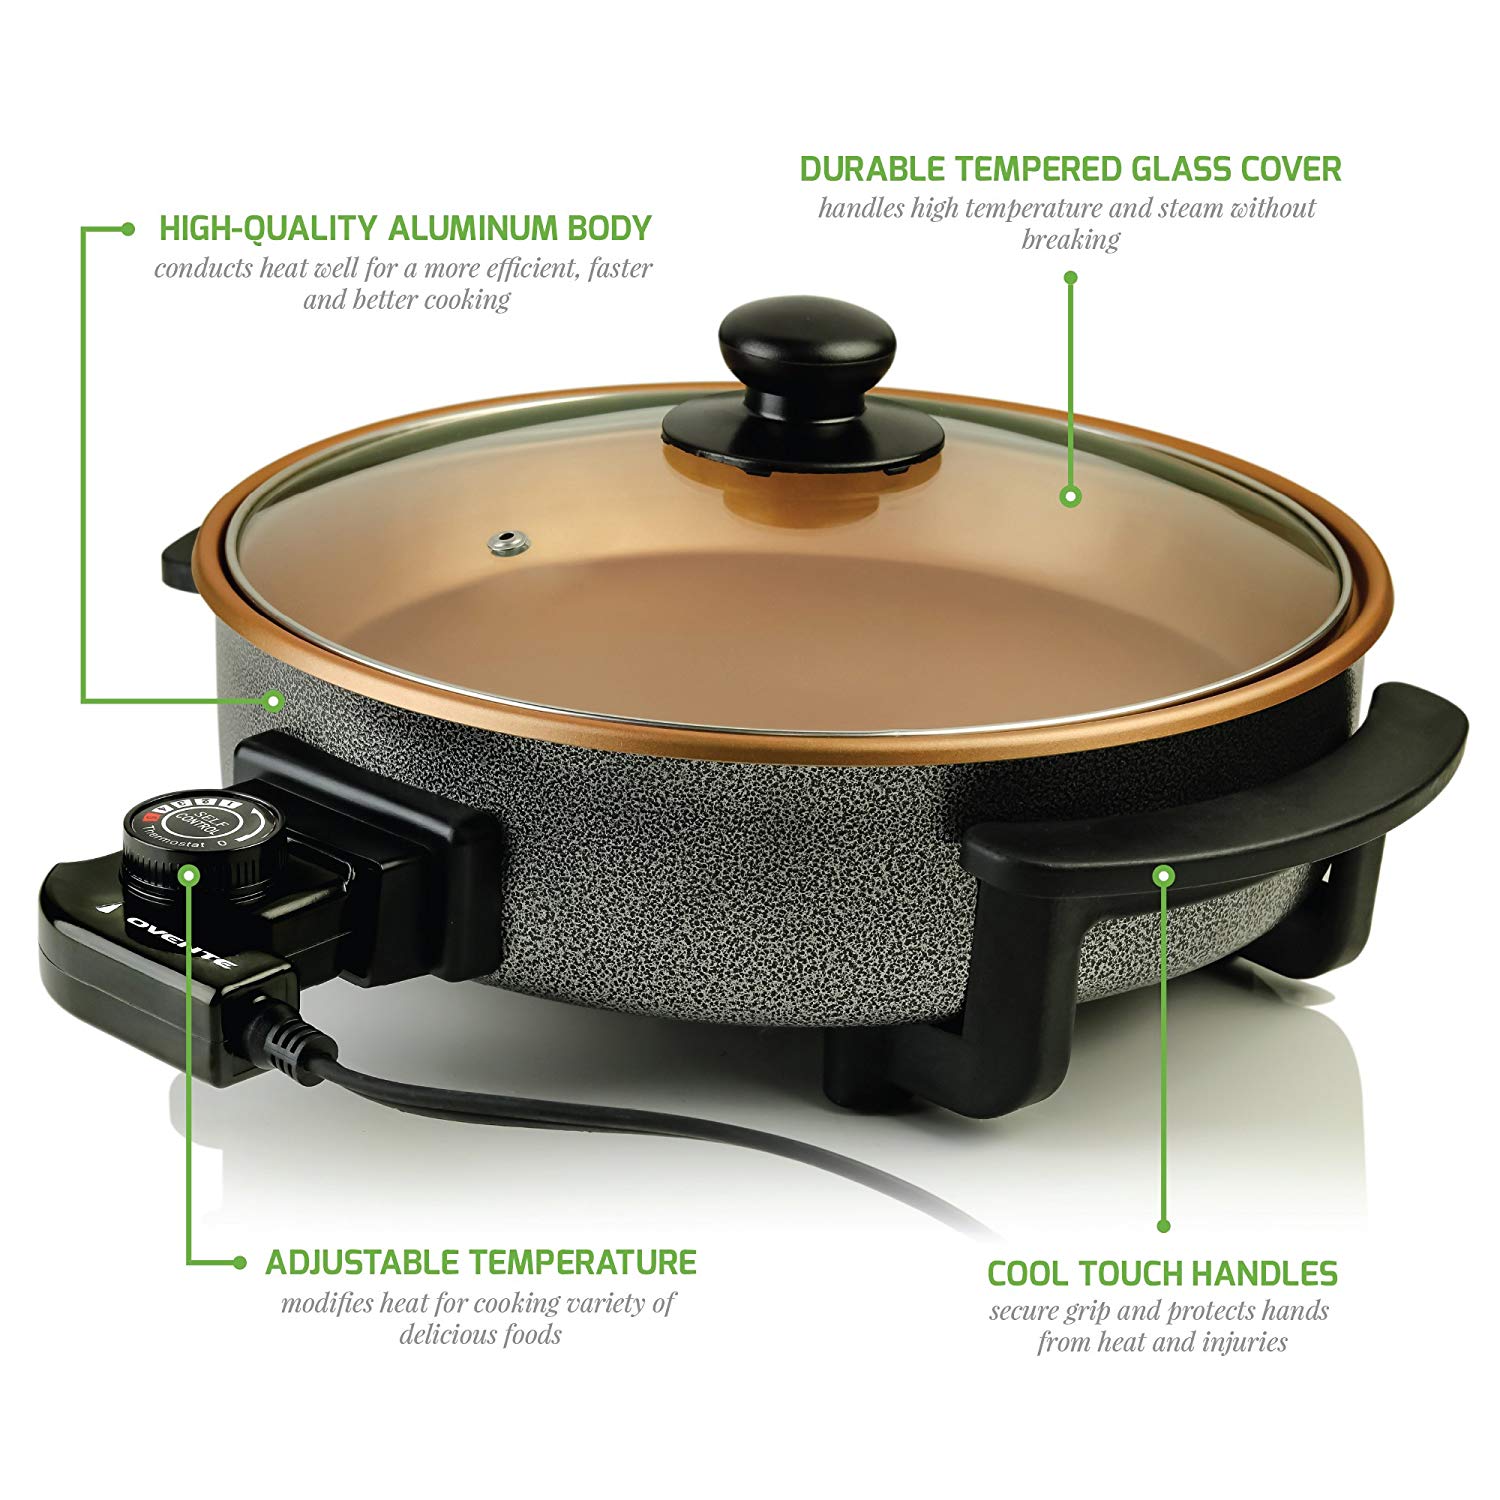 OVENTE Electric Skillet and Frying Pan, 12" Round Cooker with Nonstick Coating, Copper SK11112CO - image 3 of 9